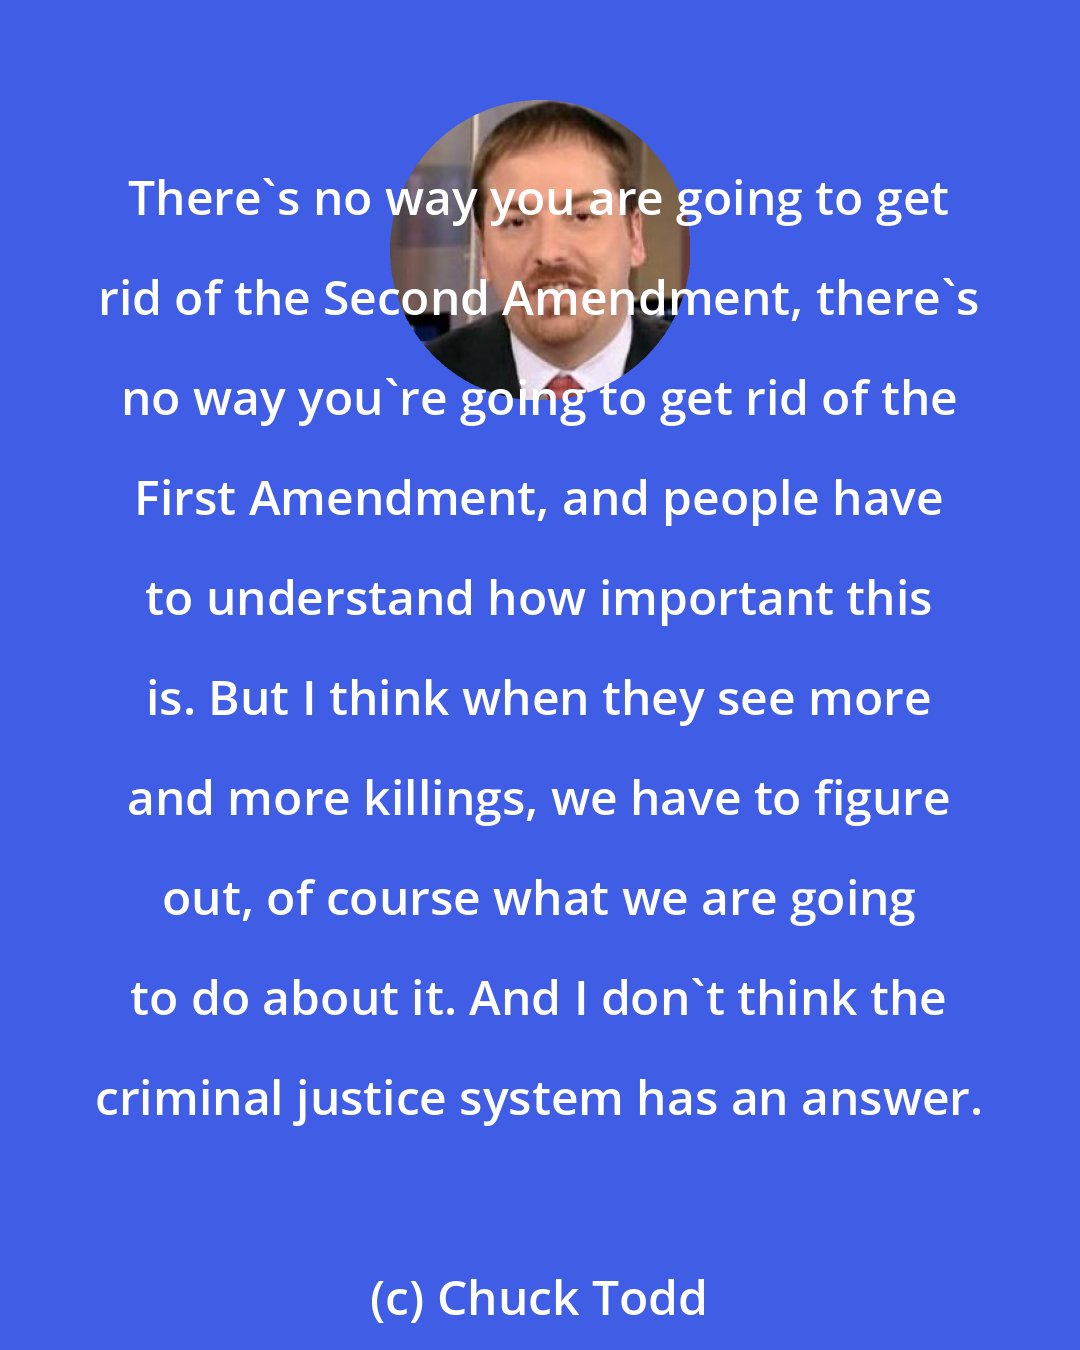 Chuck Todd: There's no way you are going to get rid of the Second Amendment, there's no way you're going to get rid of the First Amendment, and people have to understand how important this is. But I think when they see more and more killings, we have to figure out, of course what we are going to do about it. And I don't think the criminal justice system has an answer.